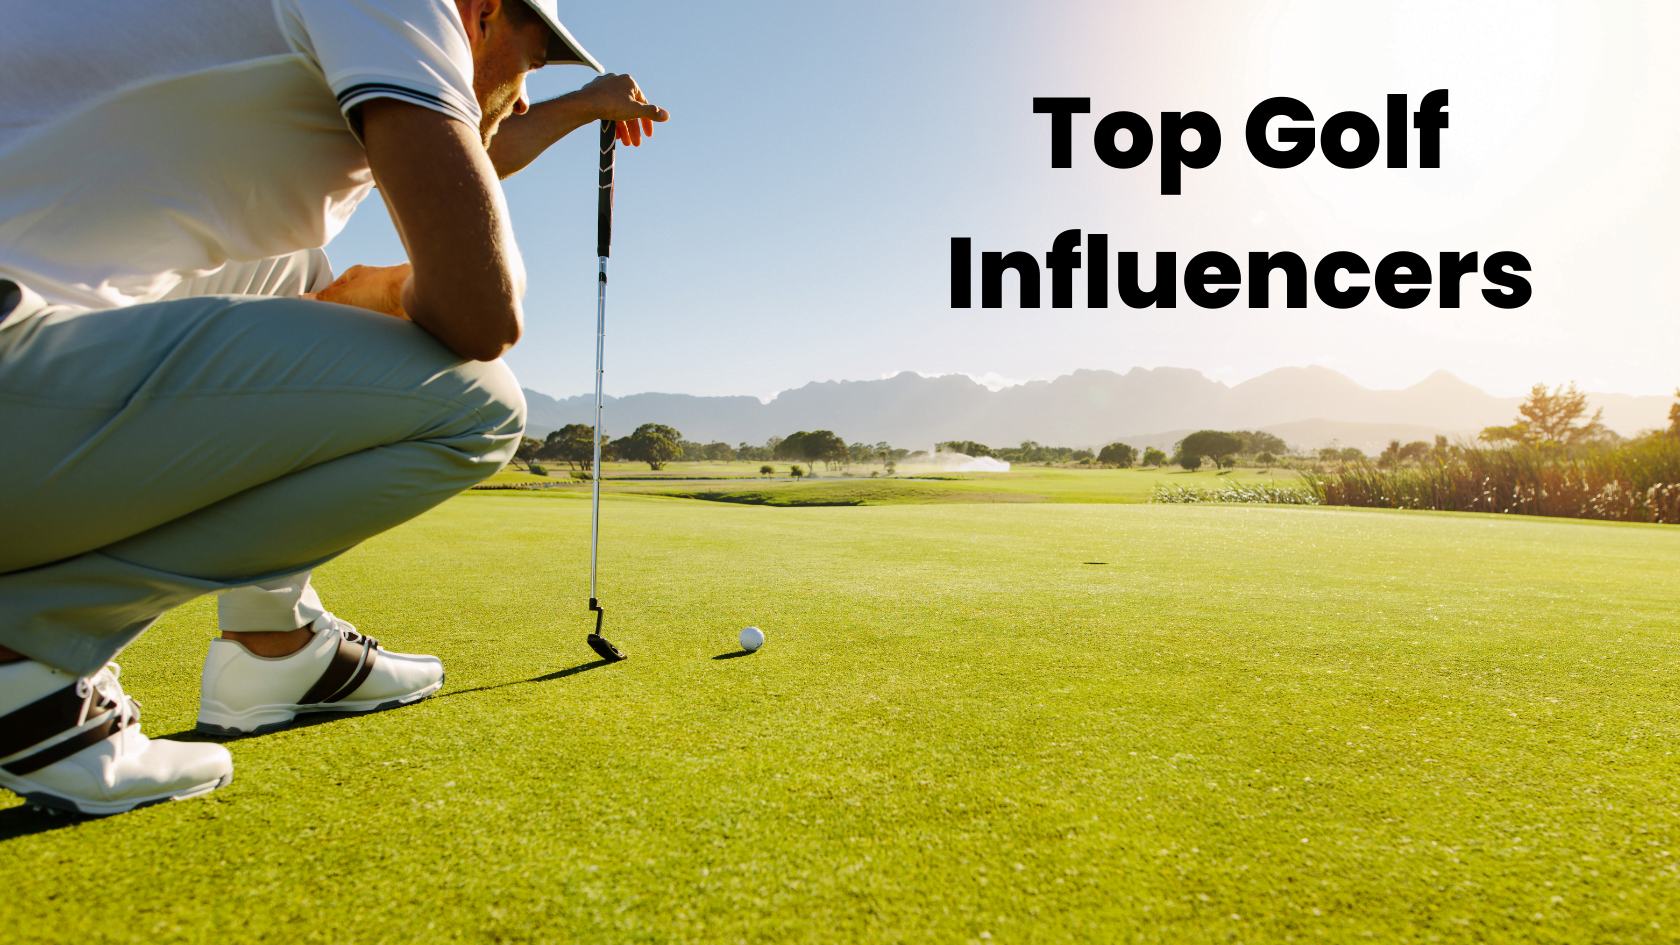 Top Golf Influencers in the US